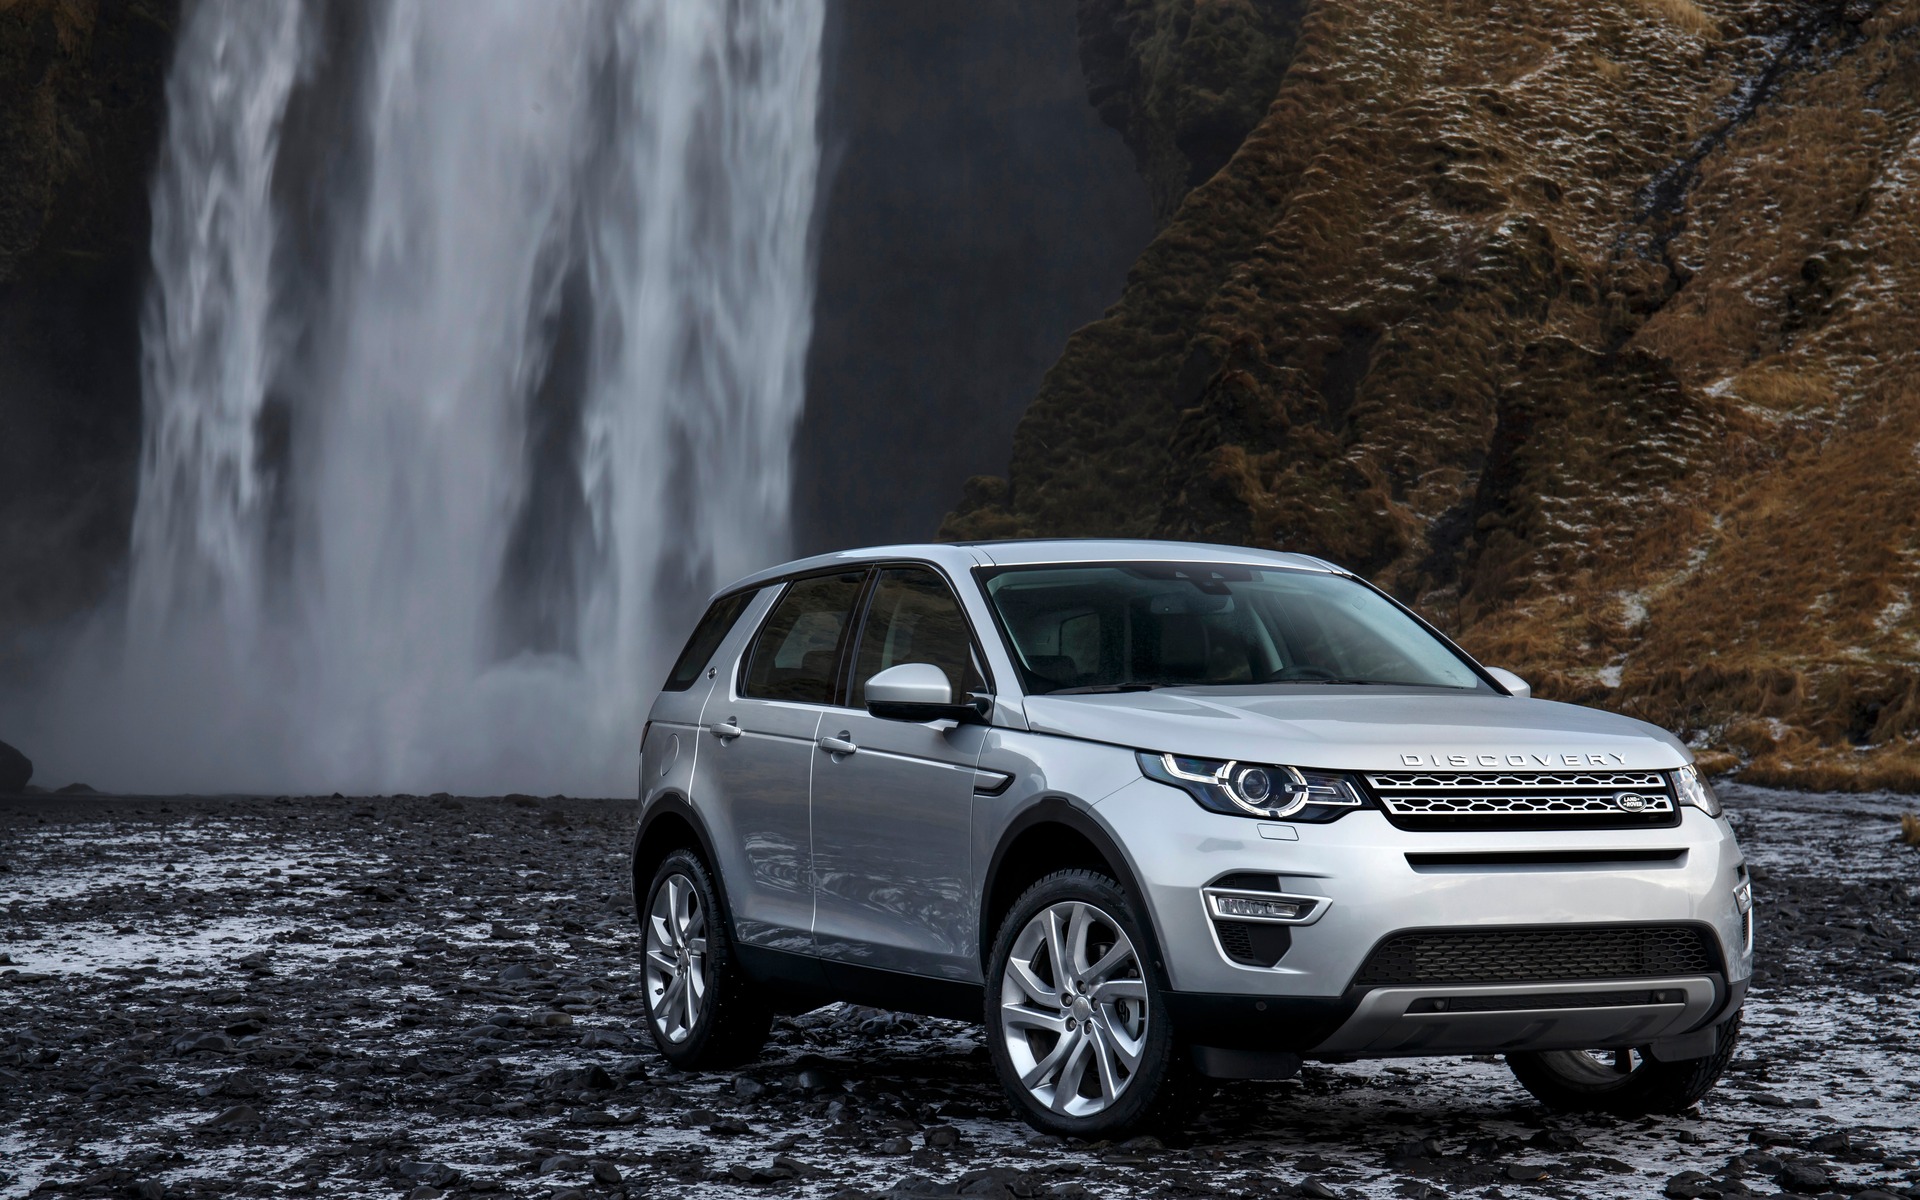 2015 Land Rover Discovery Sport: Built For Versatility - The Car Guide